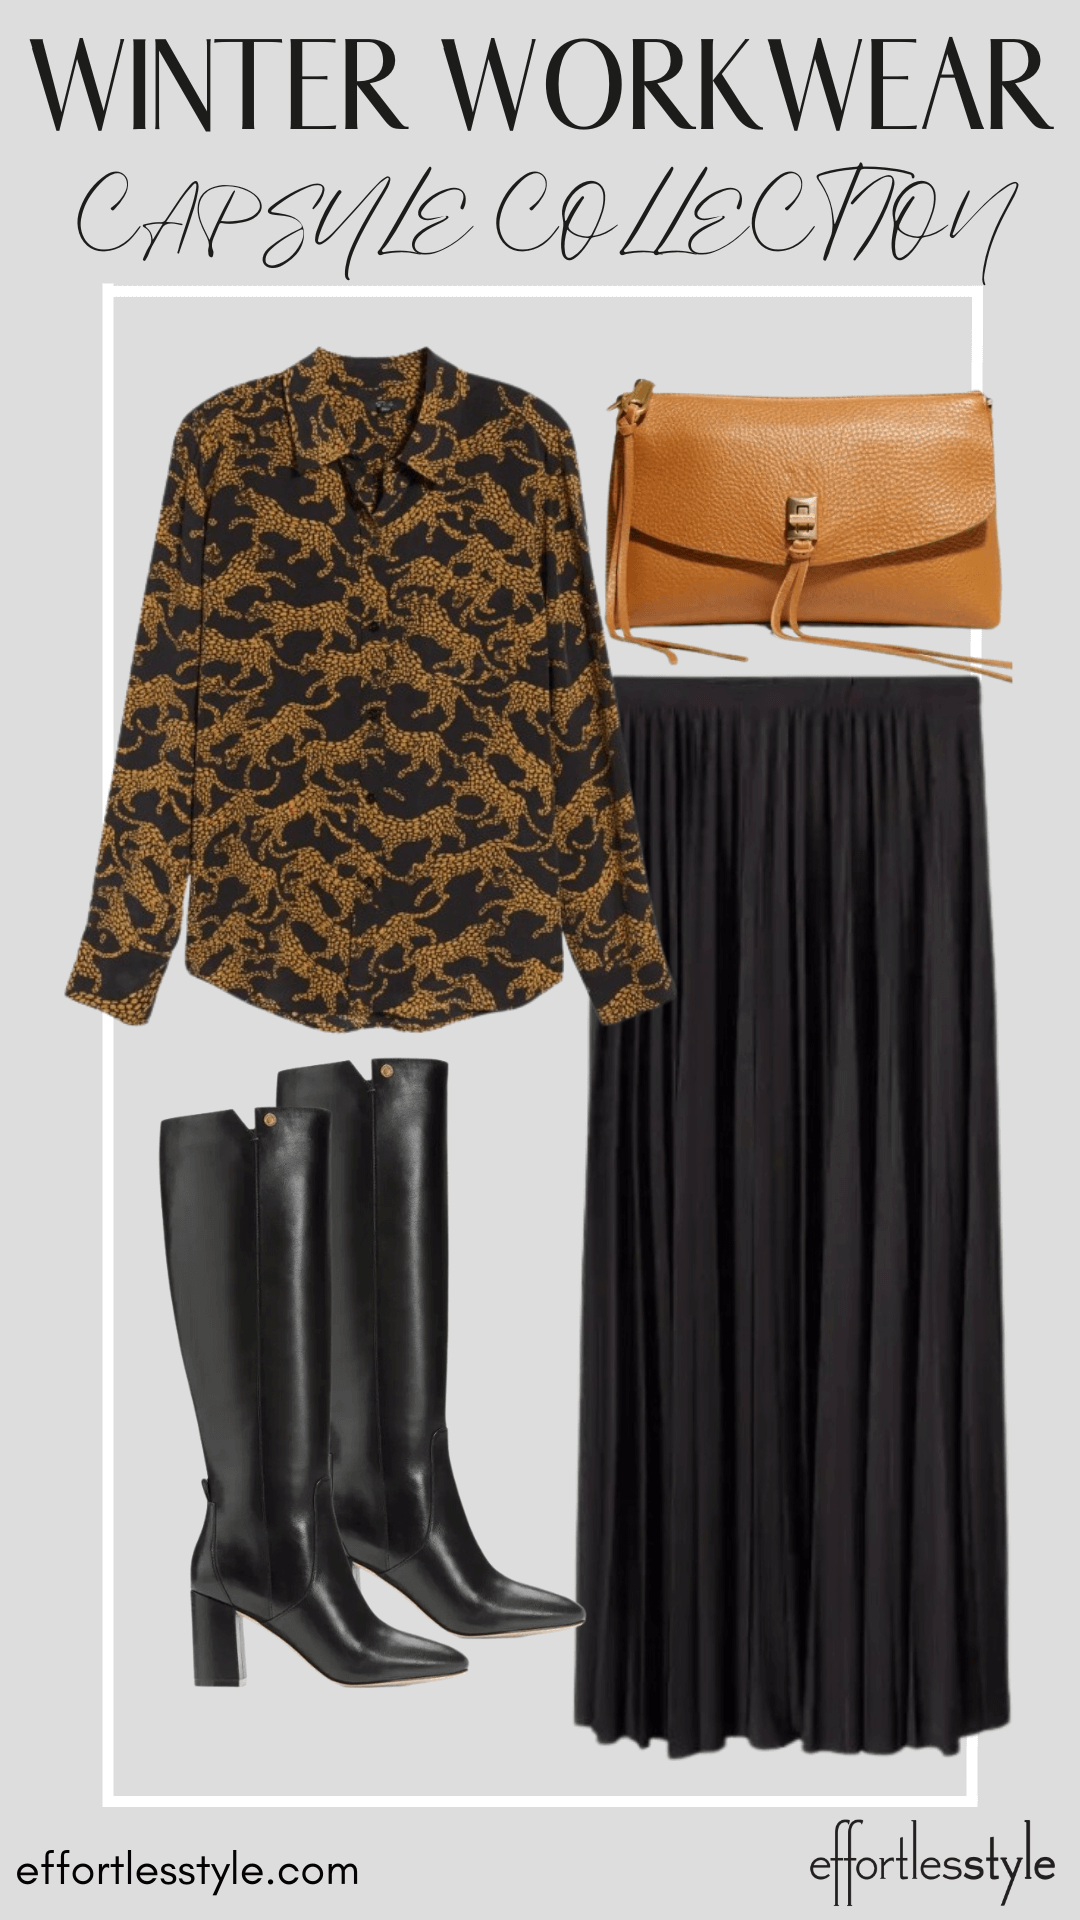 How To Wear Our Winter Workwear Capsule Wardrobe Lynx Printed Blouse & Long Skirt how to style a long skirt for winter how to wear tall boots for winter how to wear a skirt and tall boots